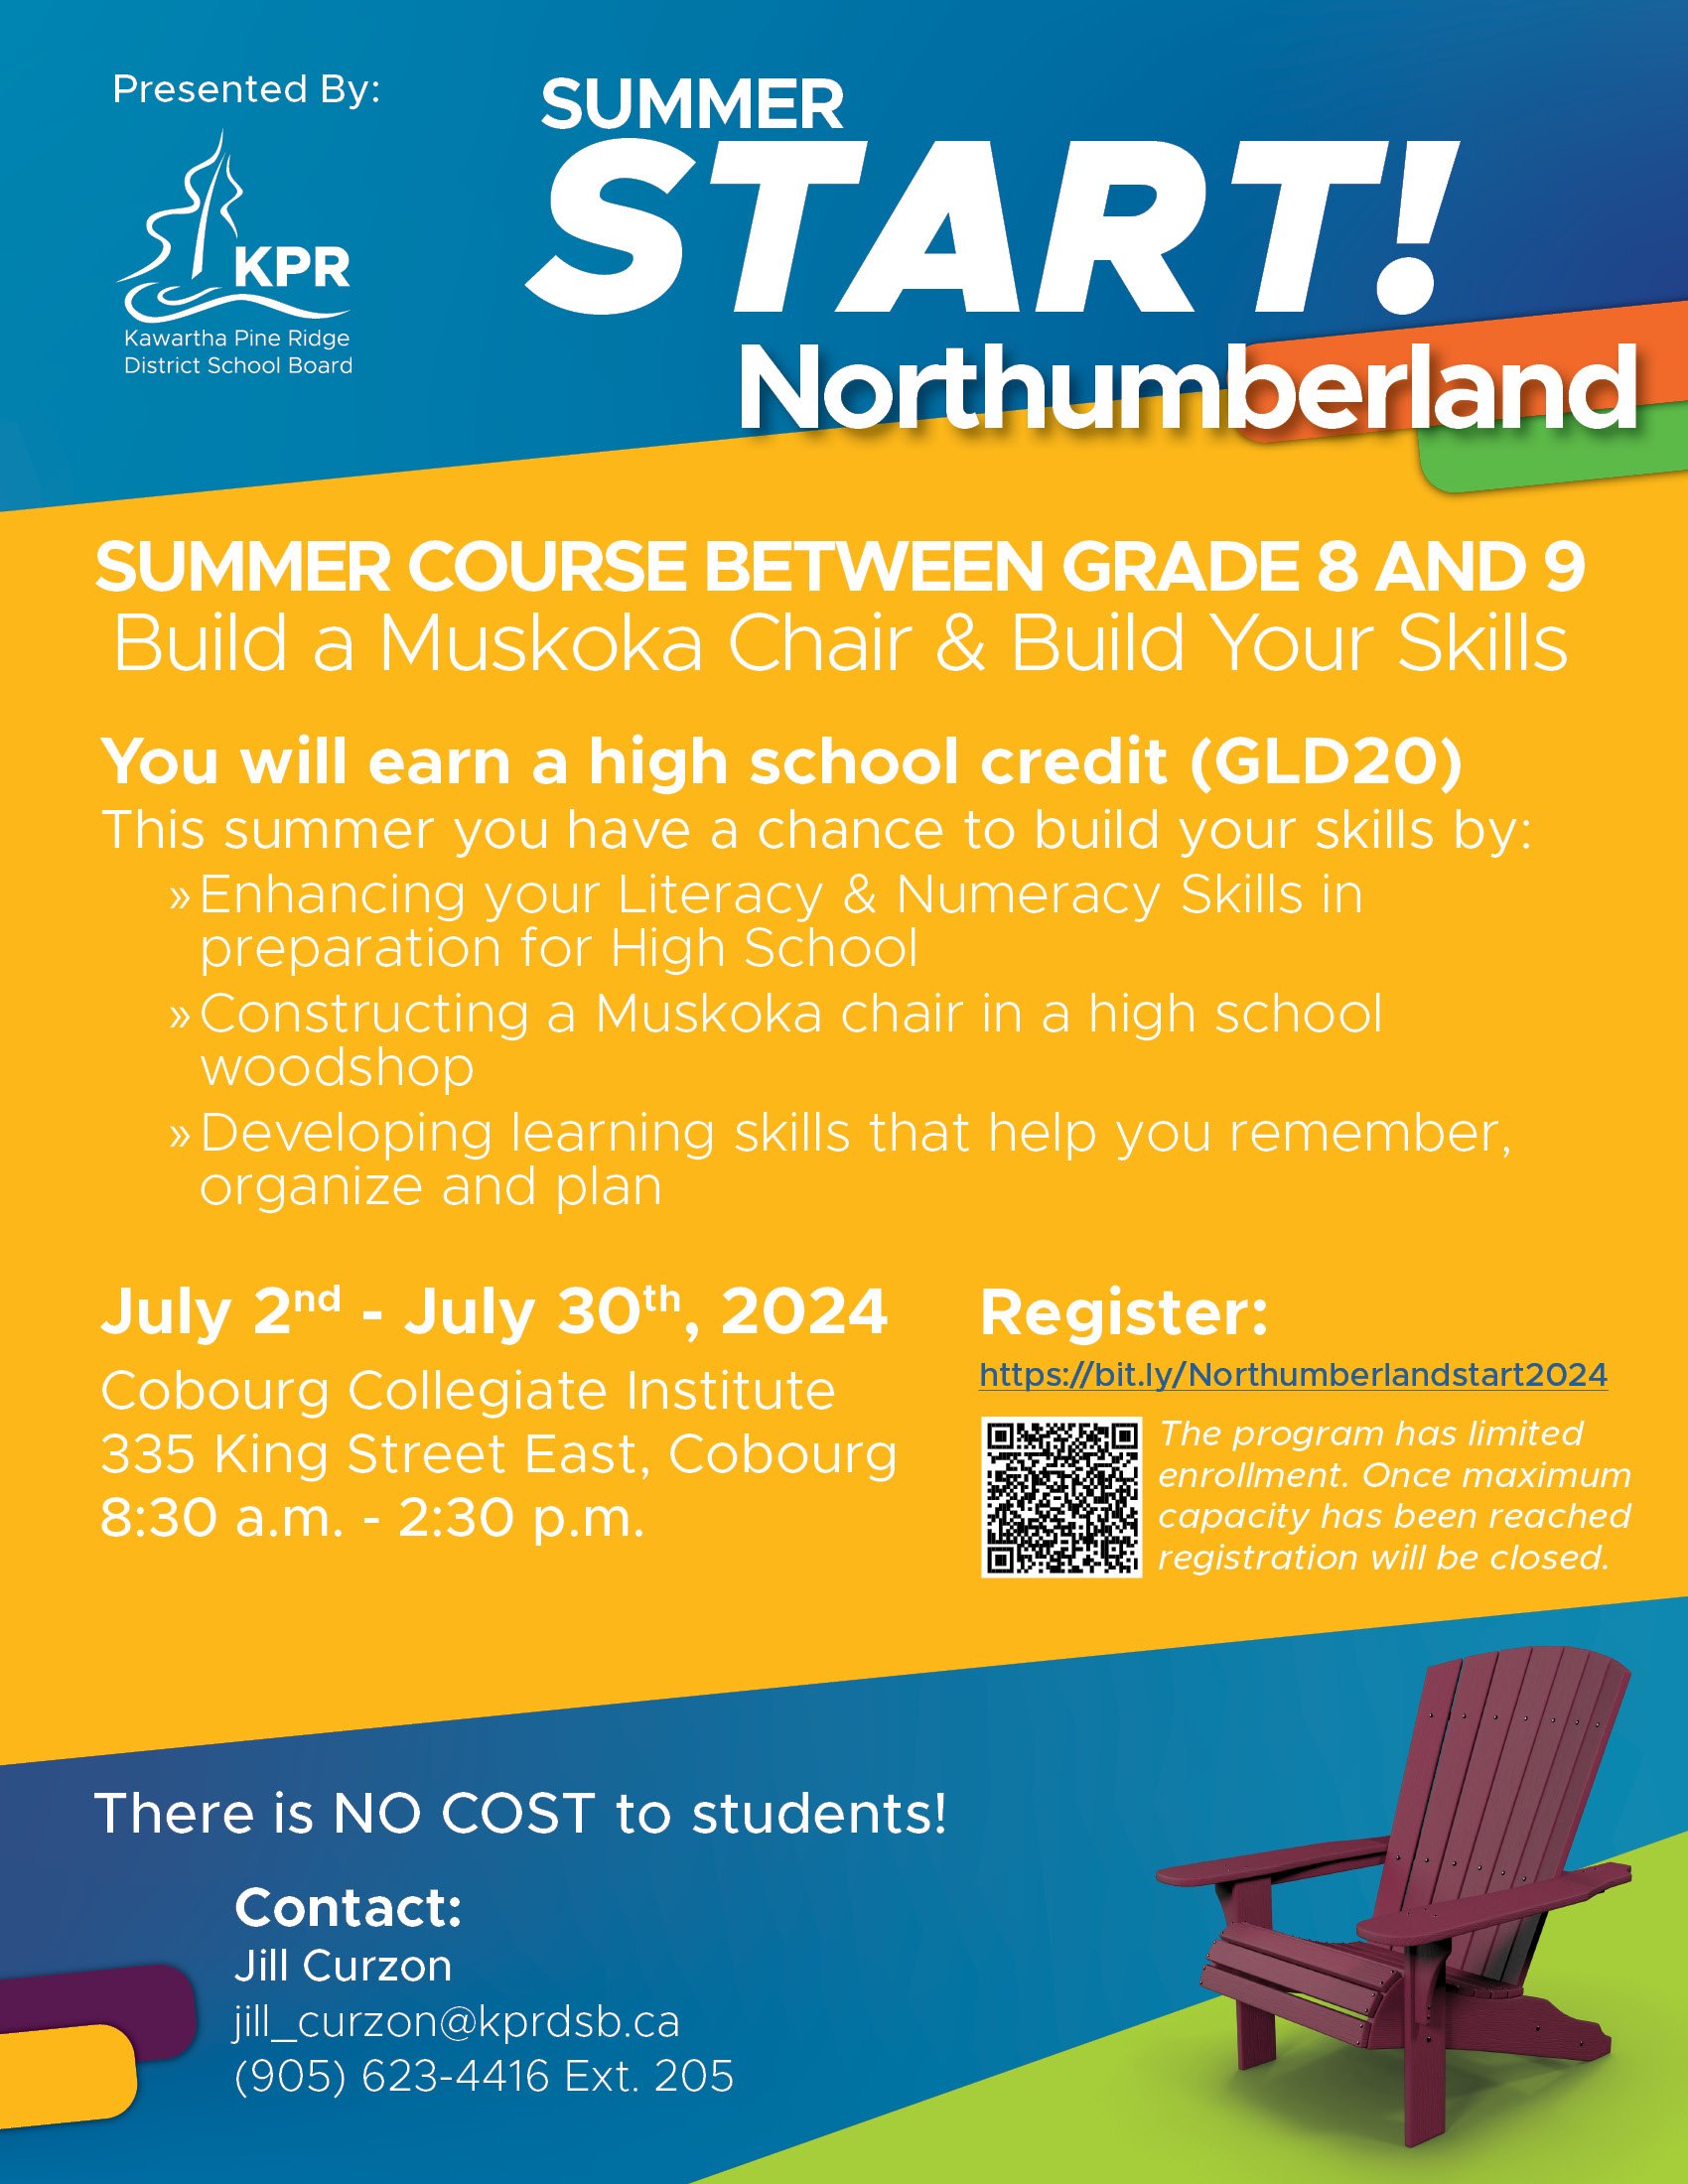 Summer School Poster for Northumberland